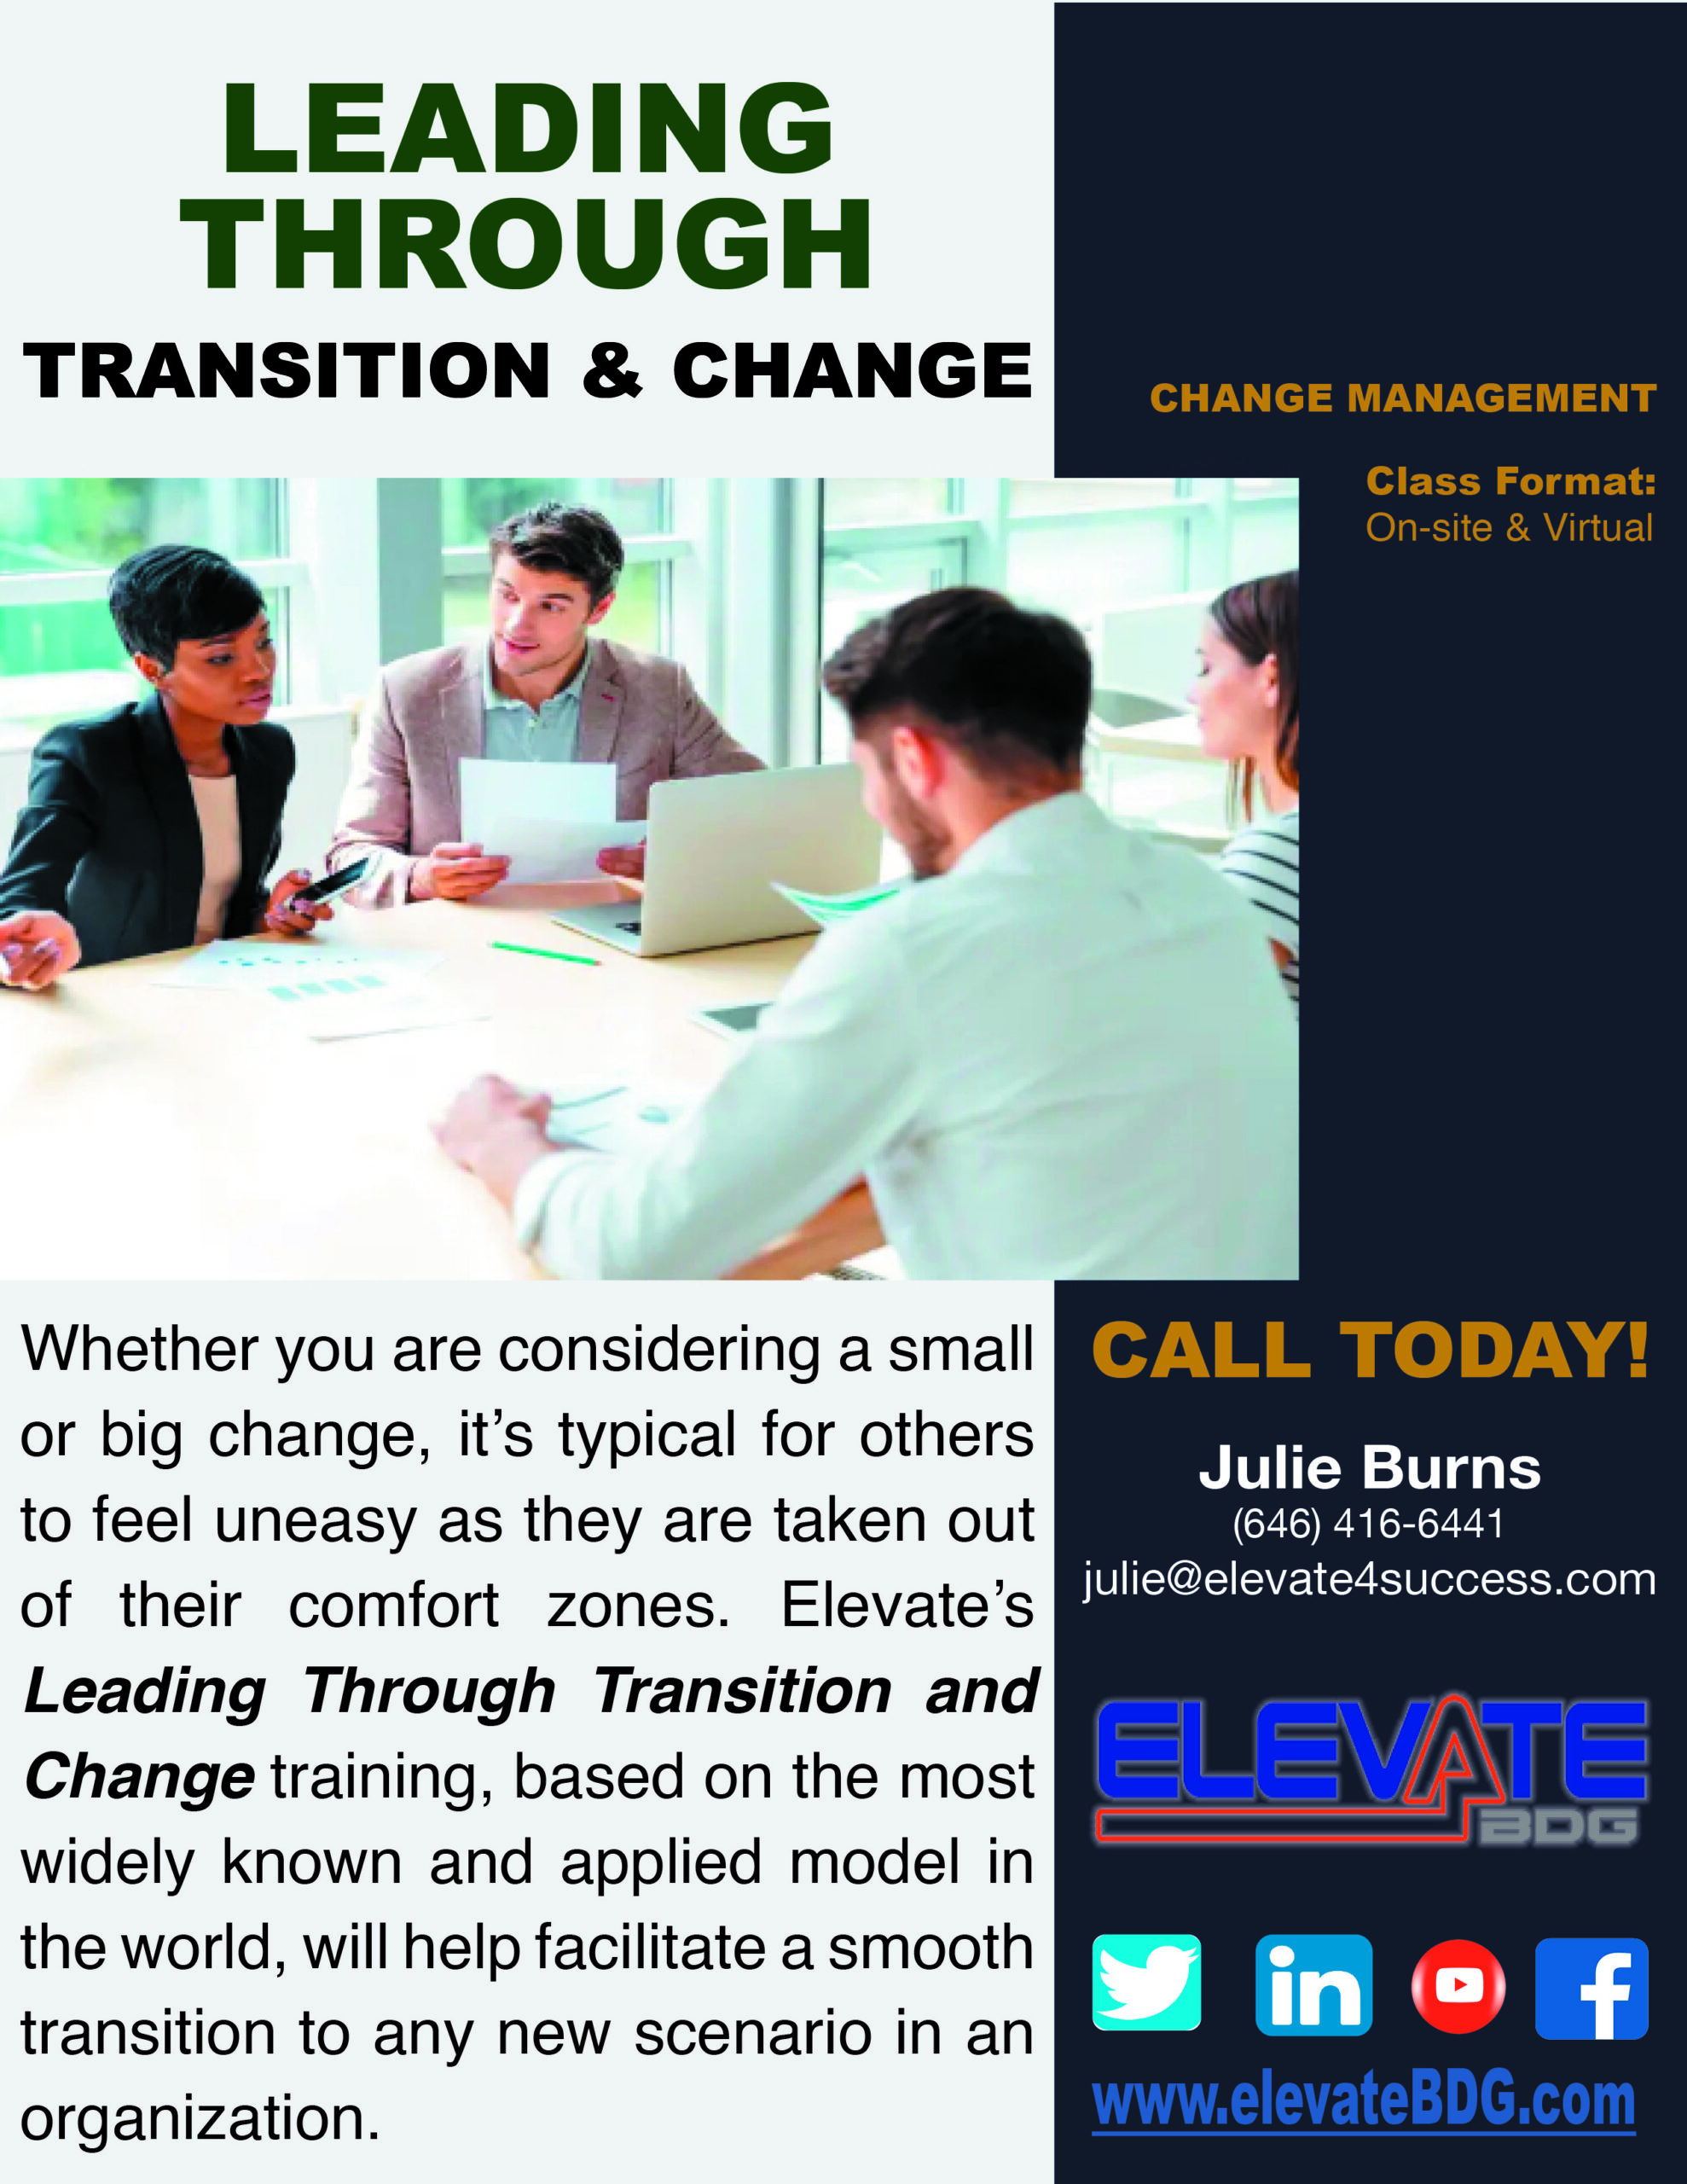 Leading Through Transition and Change Sales Flyer scaled